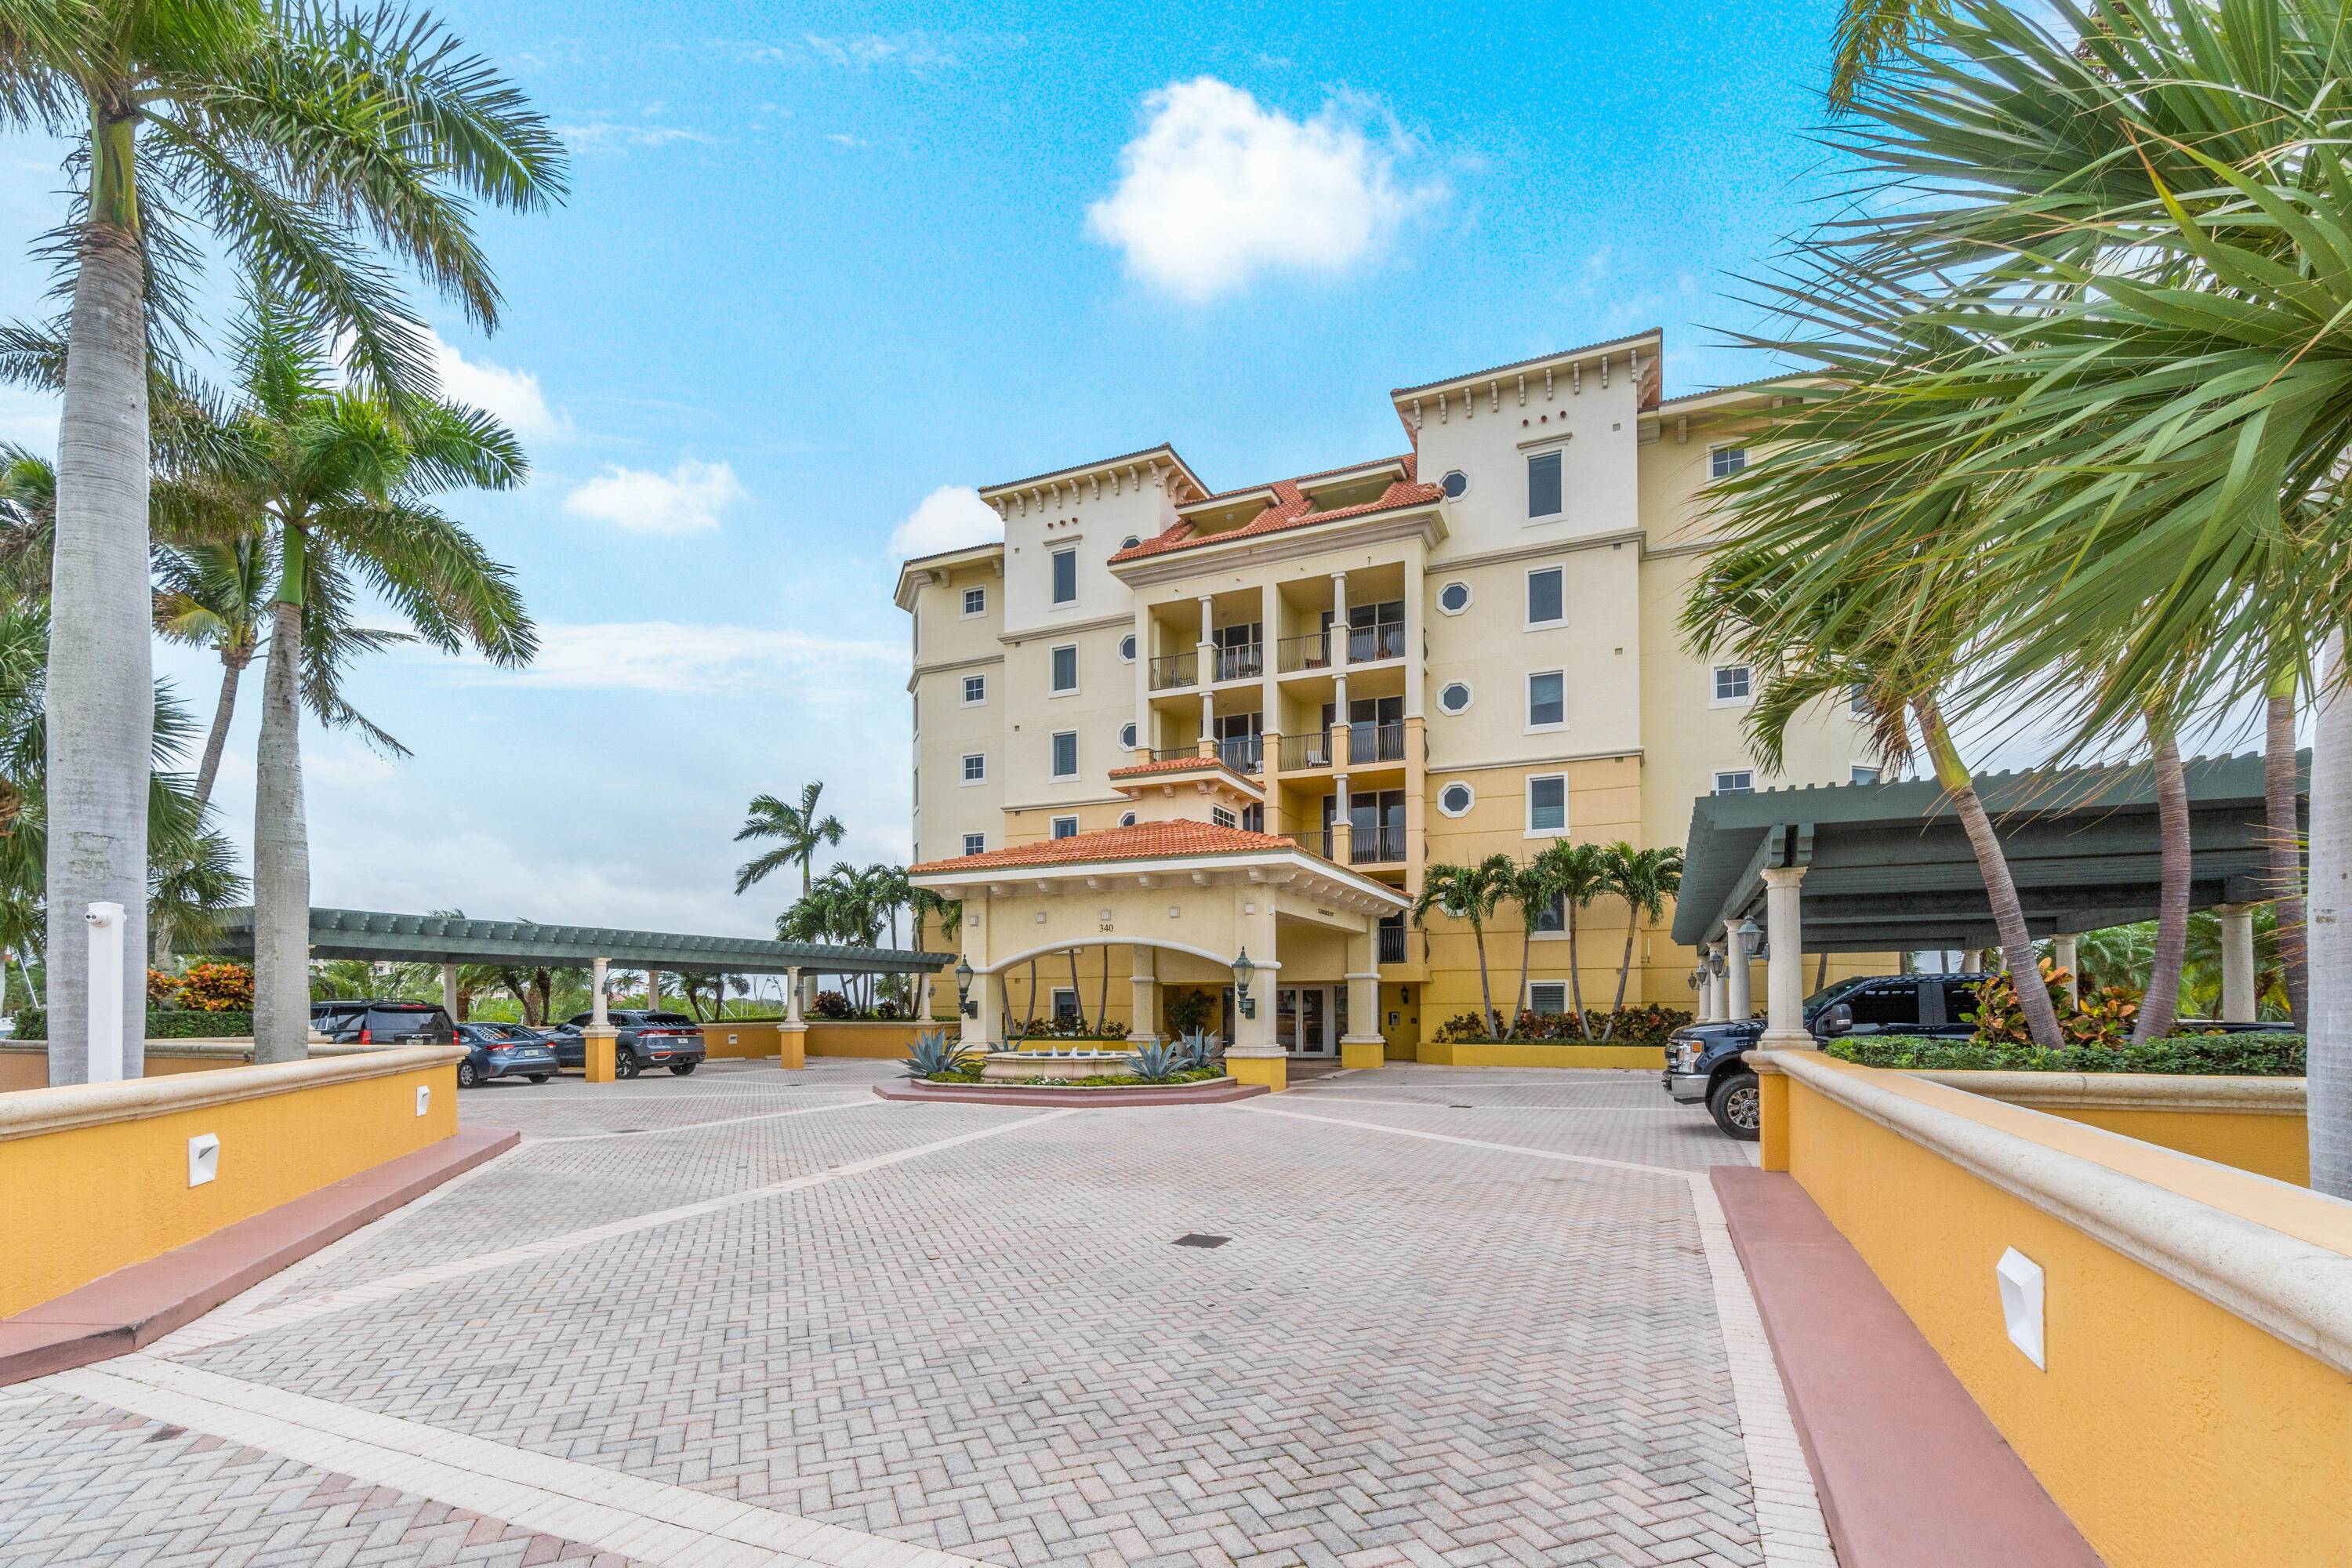 Rare opportunity to rent a fully renovated, turnkey waterfront condo at ''The Pointe at Jupiter Yacht Club.